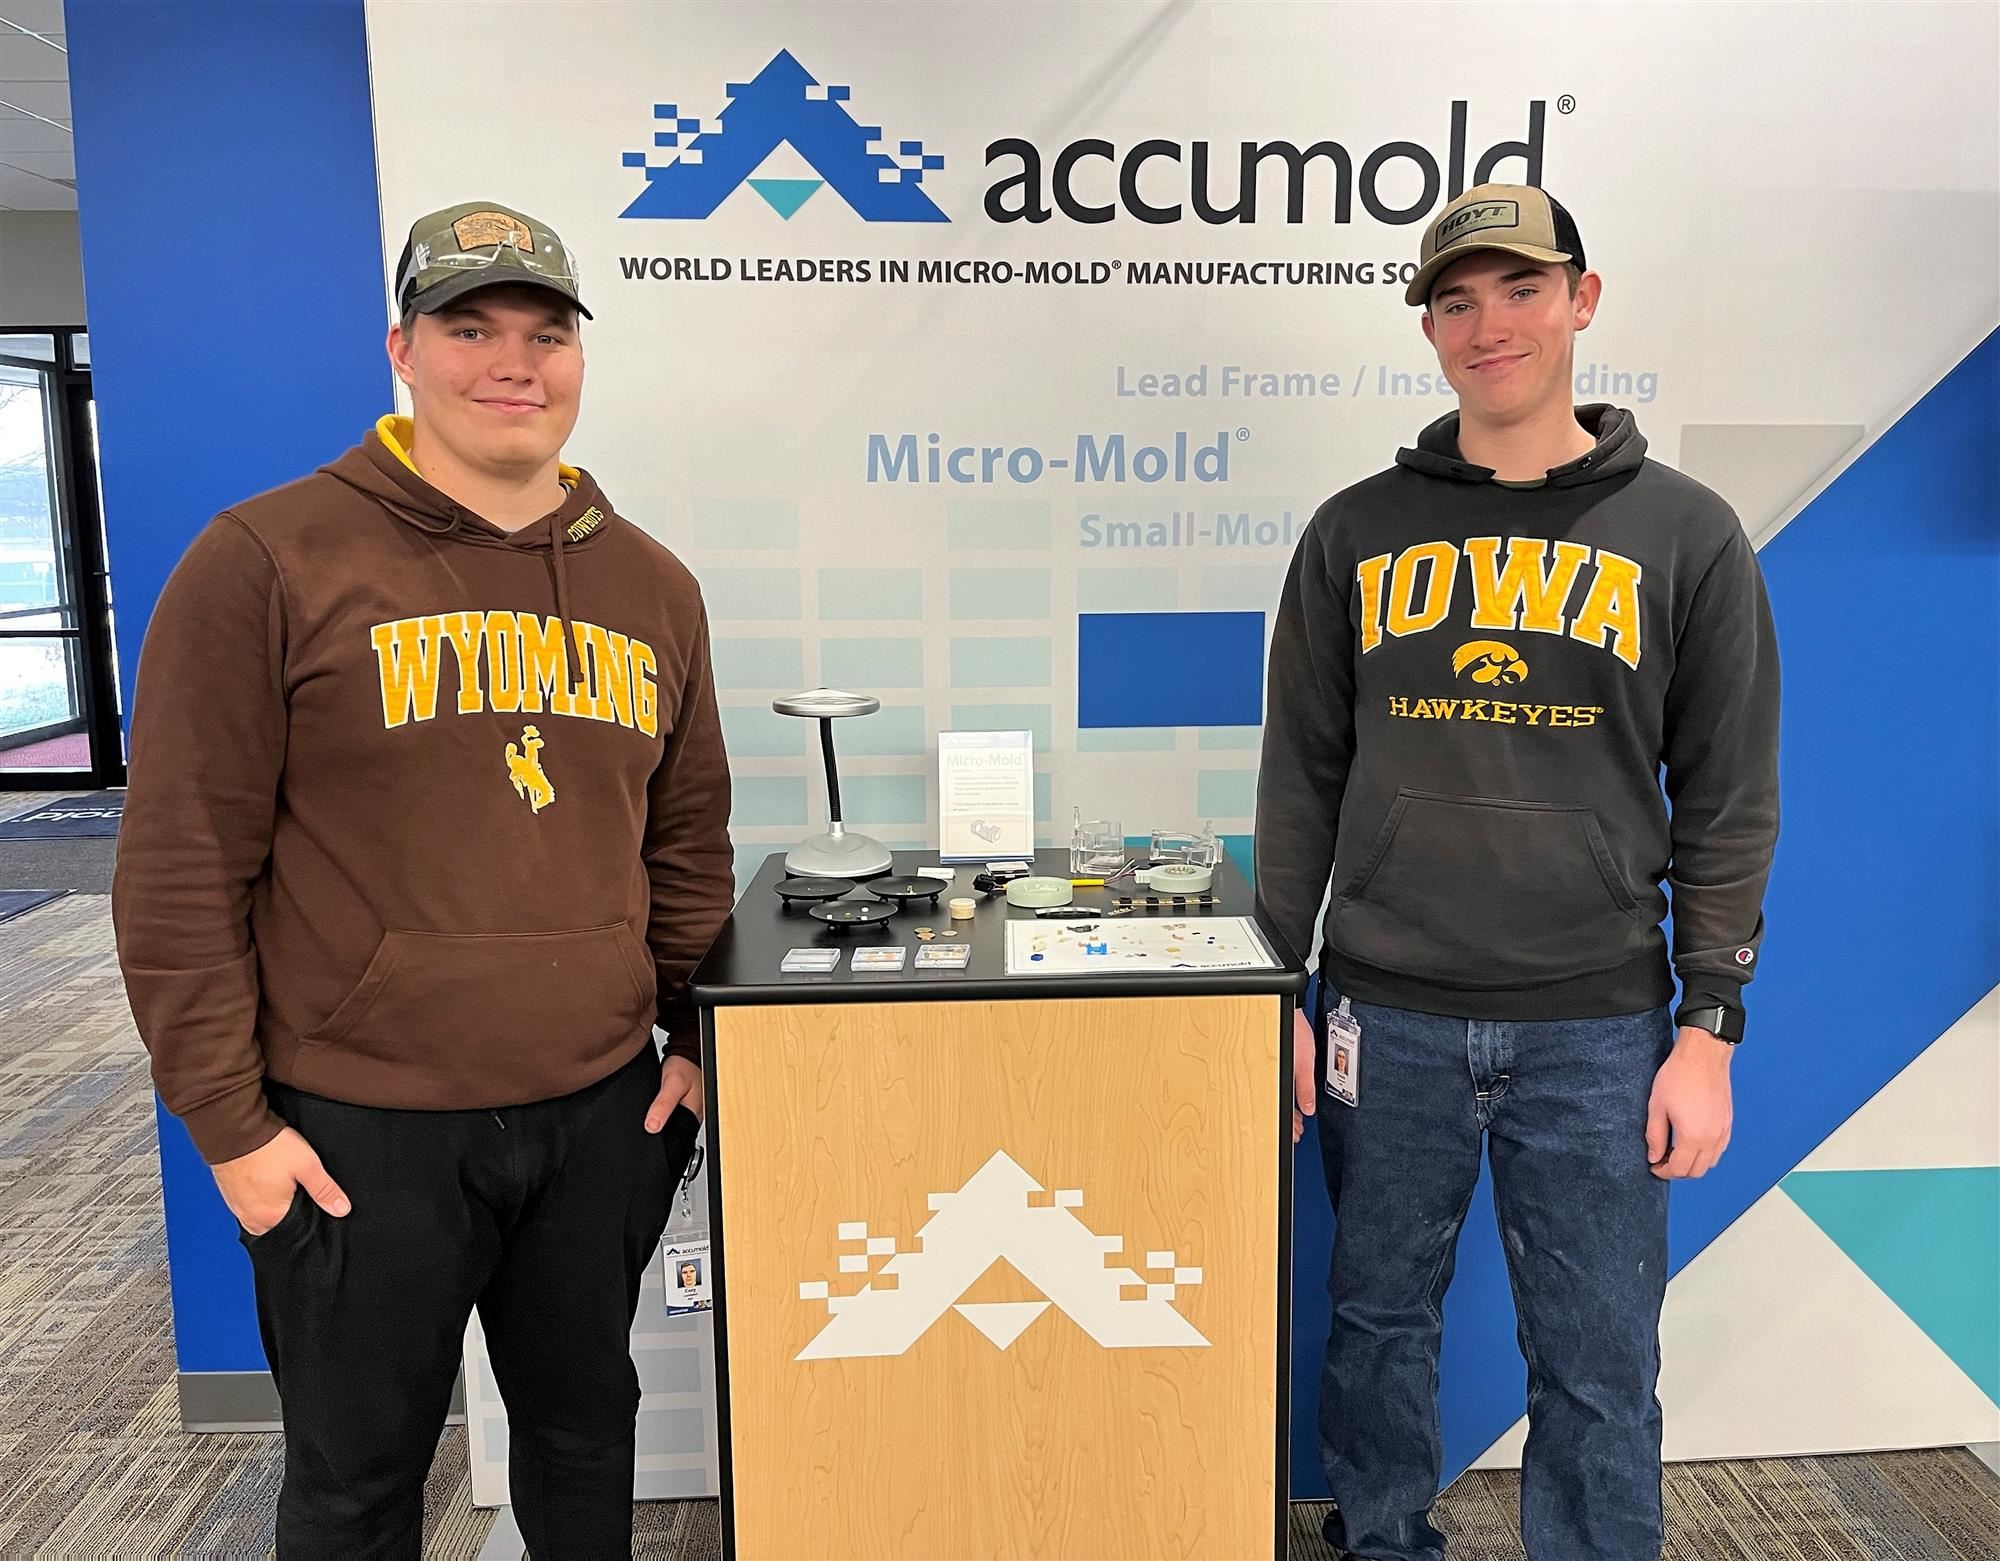 two students pictured onsite at Accumold